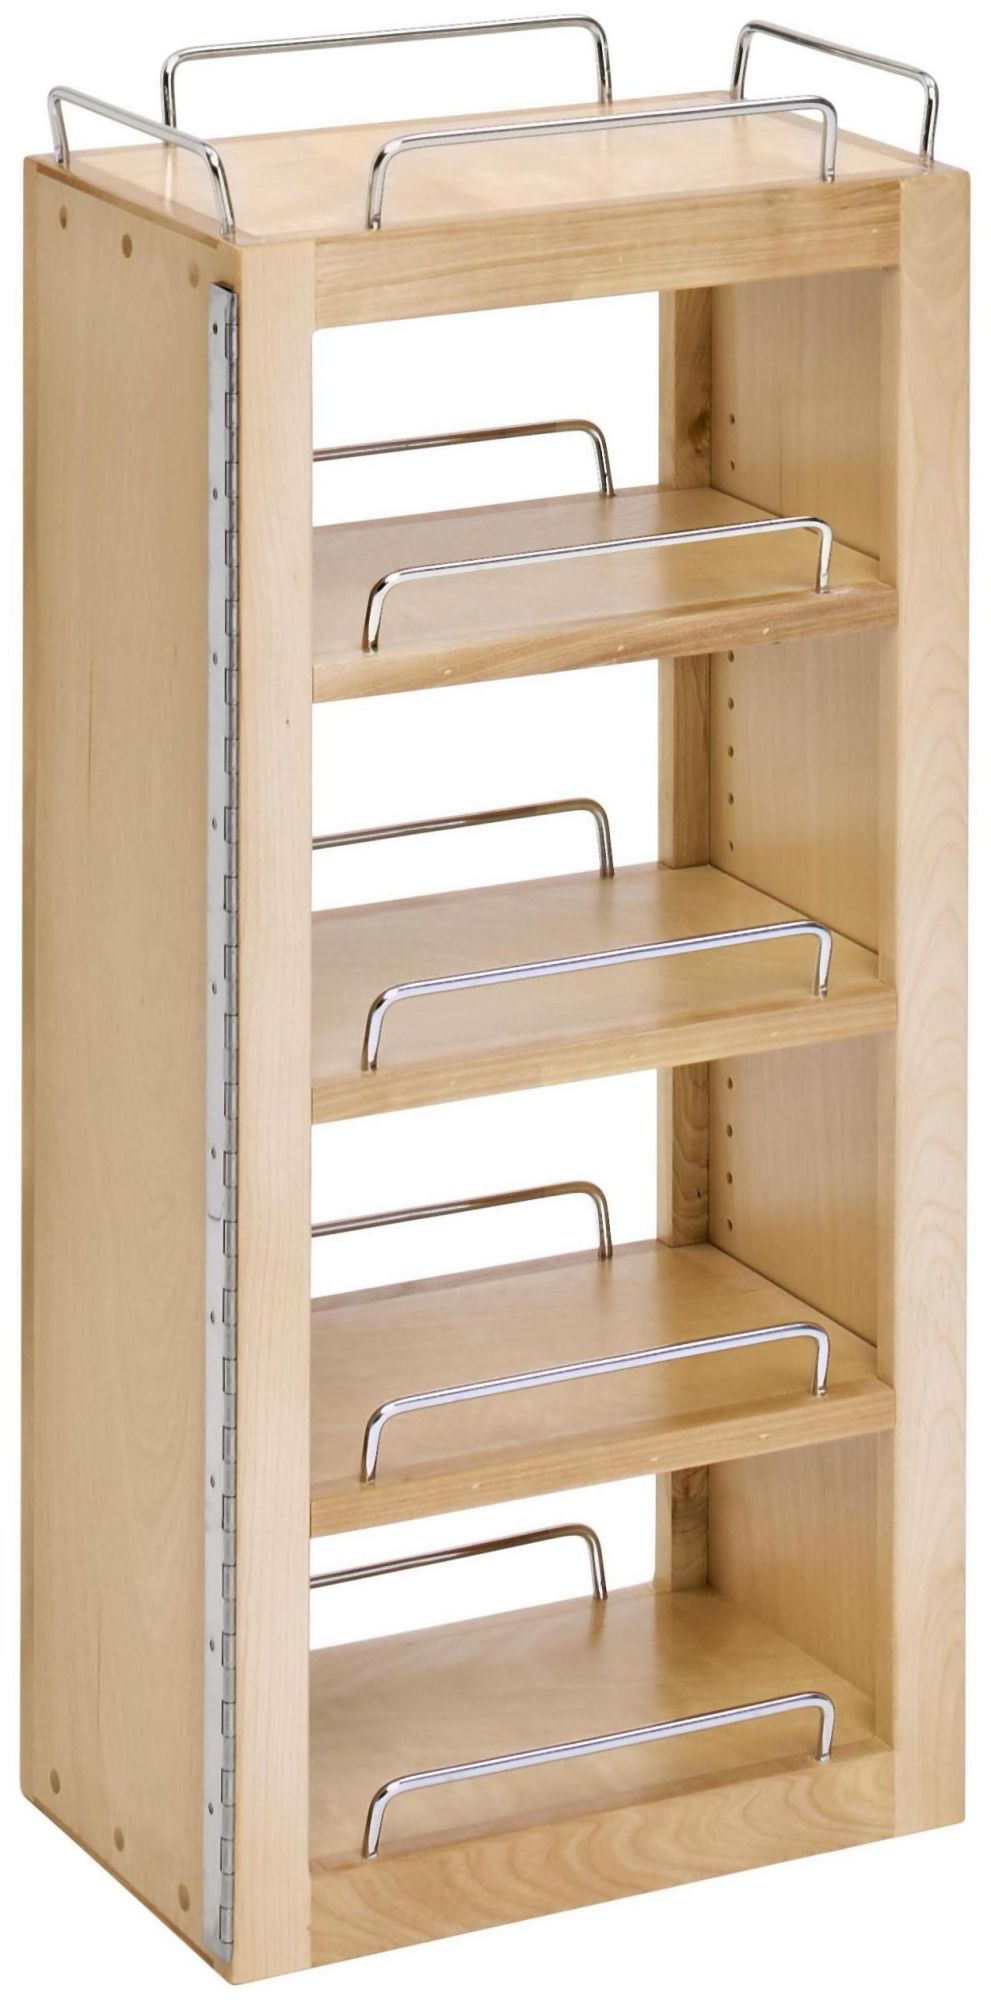 Rev-A-Shelf 4Wbsp18-25 Wood Classics 12" Wood Base Cabinet Swing Out Pantry Organizer - - image 1 of 4